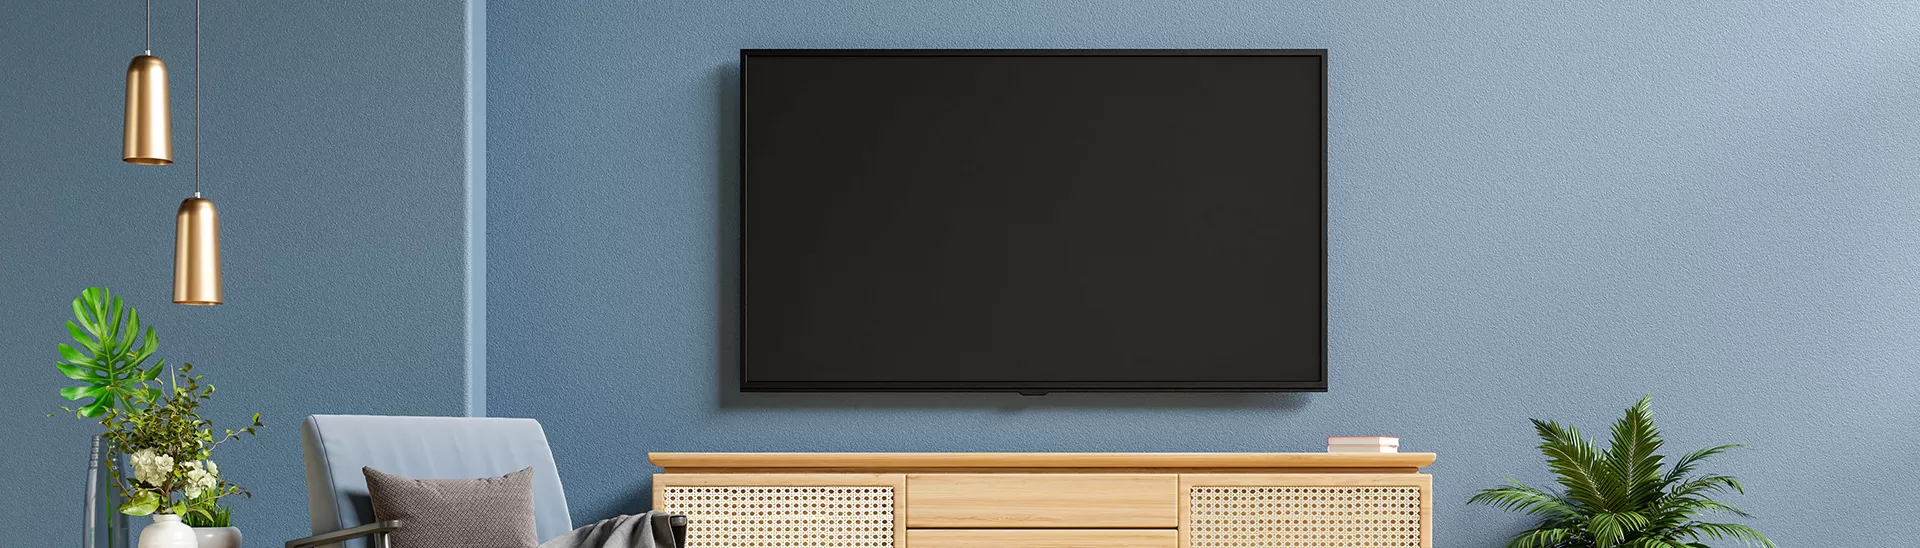 6 Impressive TV Wall Designs For Your Living Room